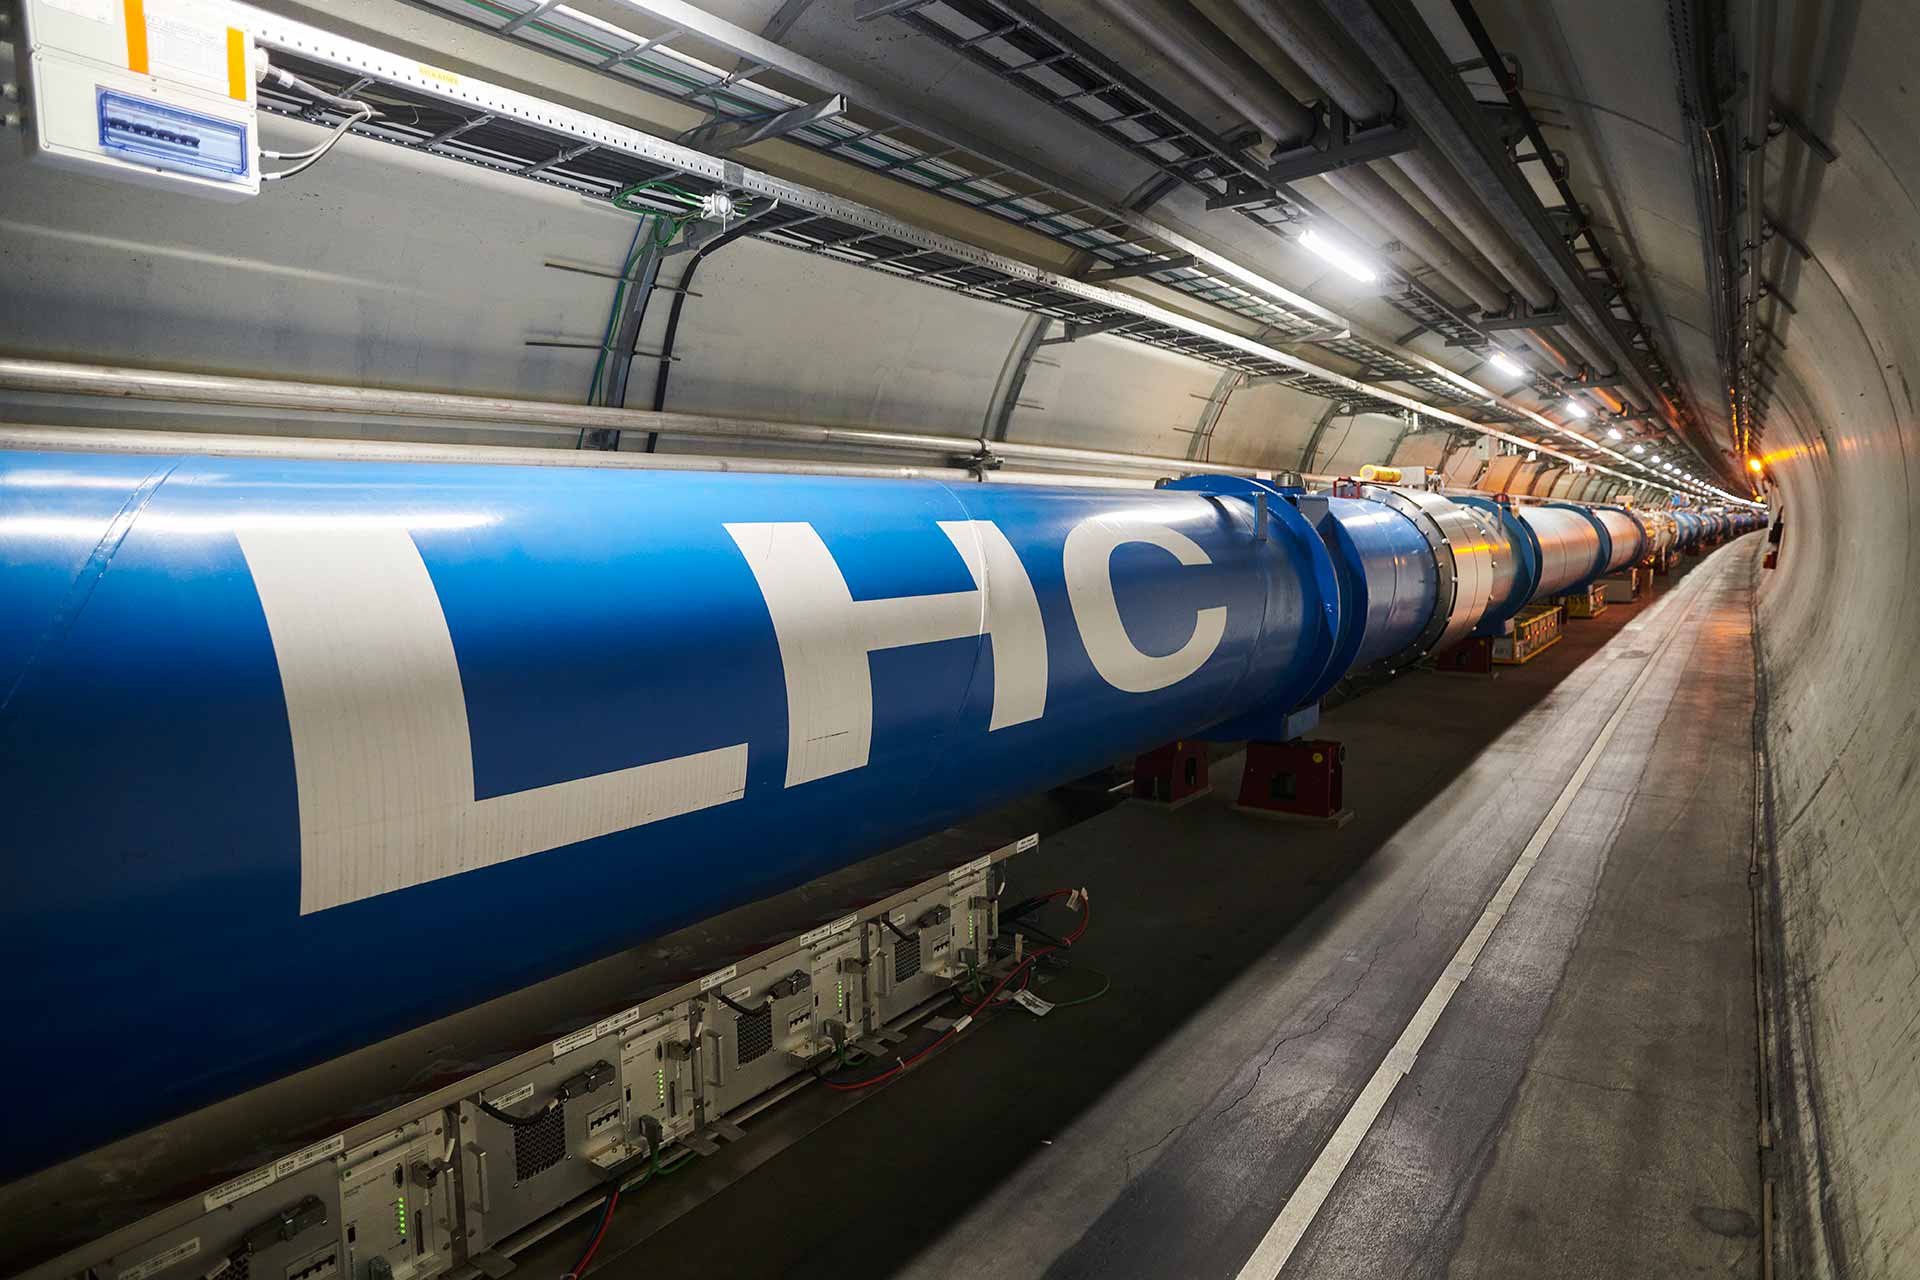 The large hadron collider at CERN.